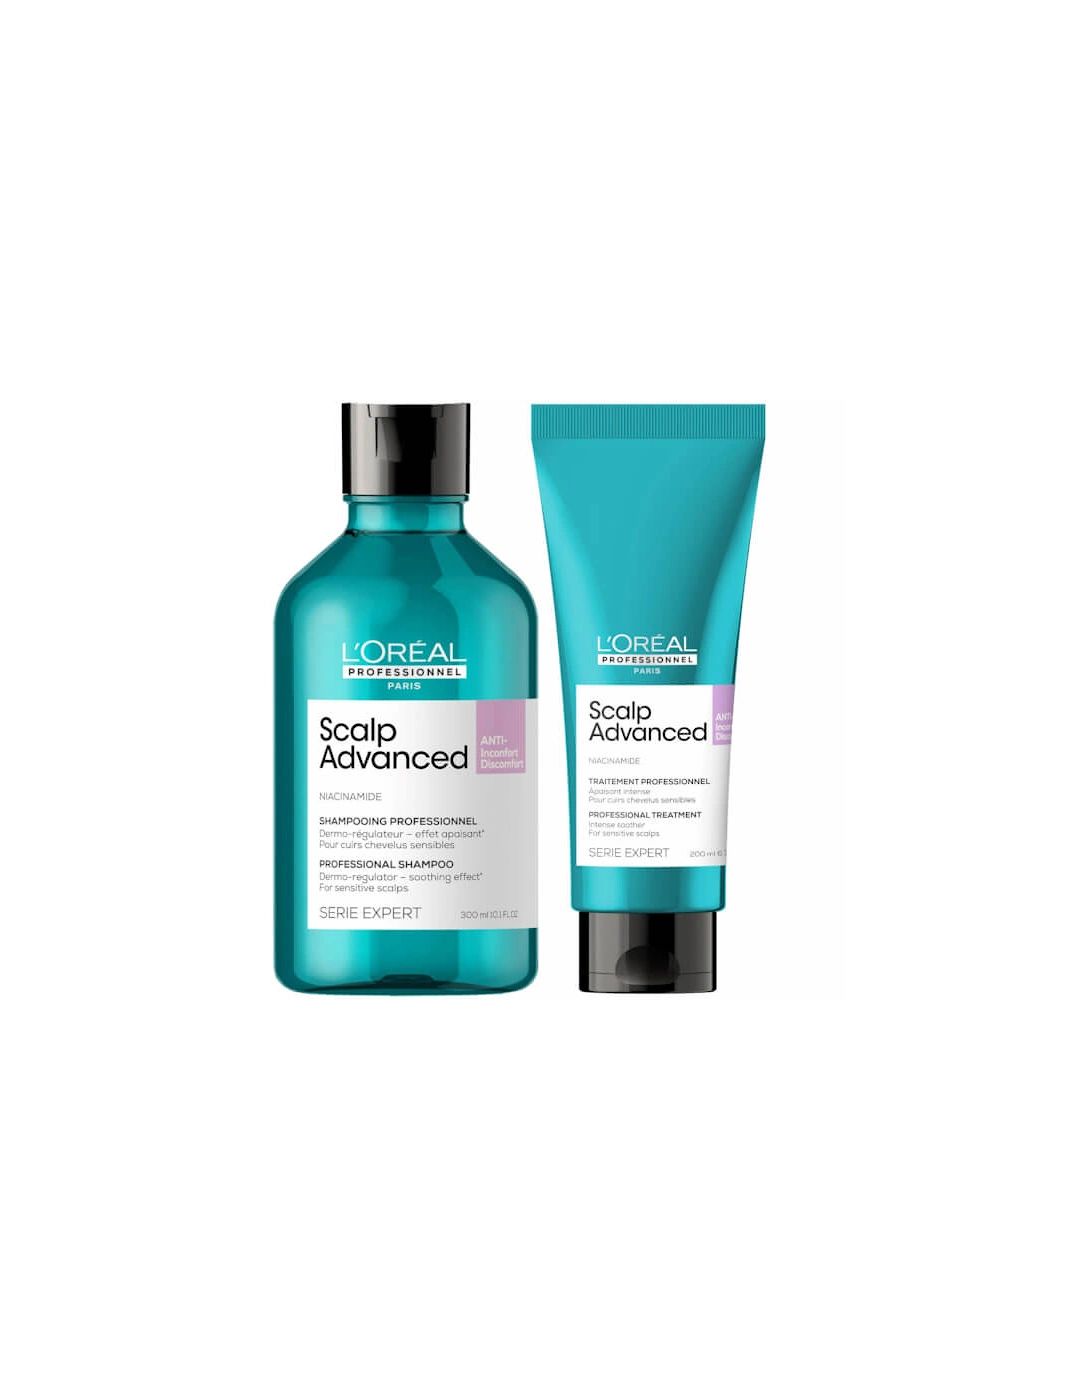 Professionnel Serié Expert Scalp Advanced Anti-Discomfort Hair Shampoo and Treatment Duo, 2 of 1